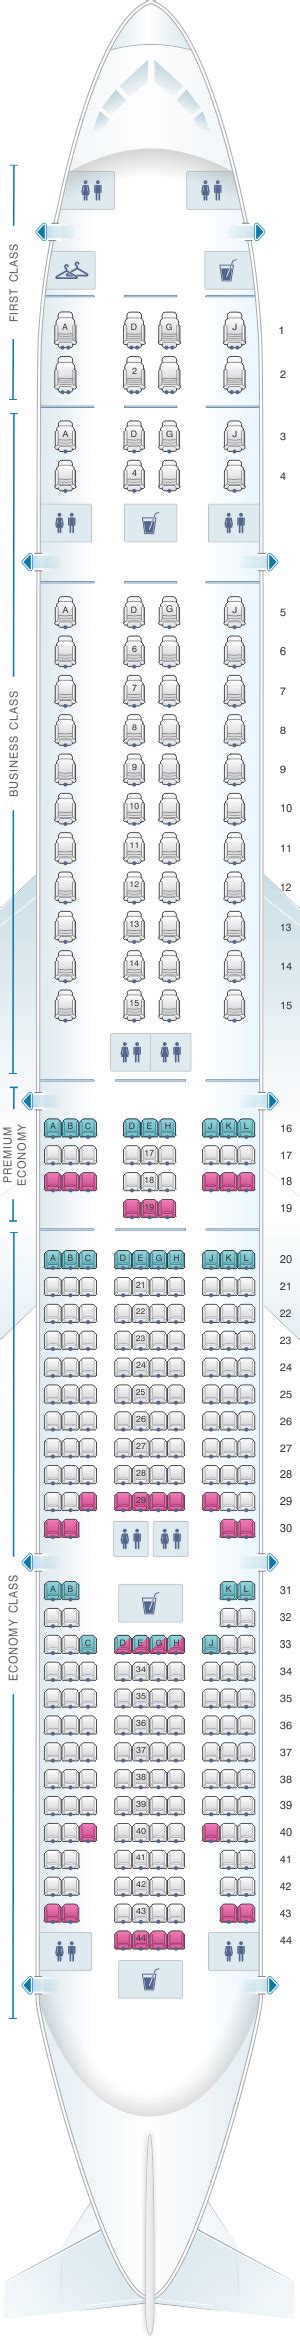 Contact information for ondrej-hrabal.eu - 28D. this seat may have limited recline. this seat is near the lavatory. 29D. this seat has extra legroom. no under-seat stowage during takeoff and landing. traytable in armrest means narrower seat. 20L.